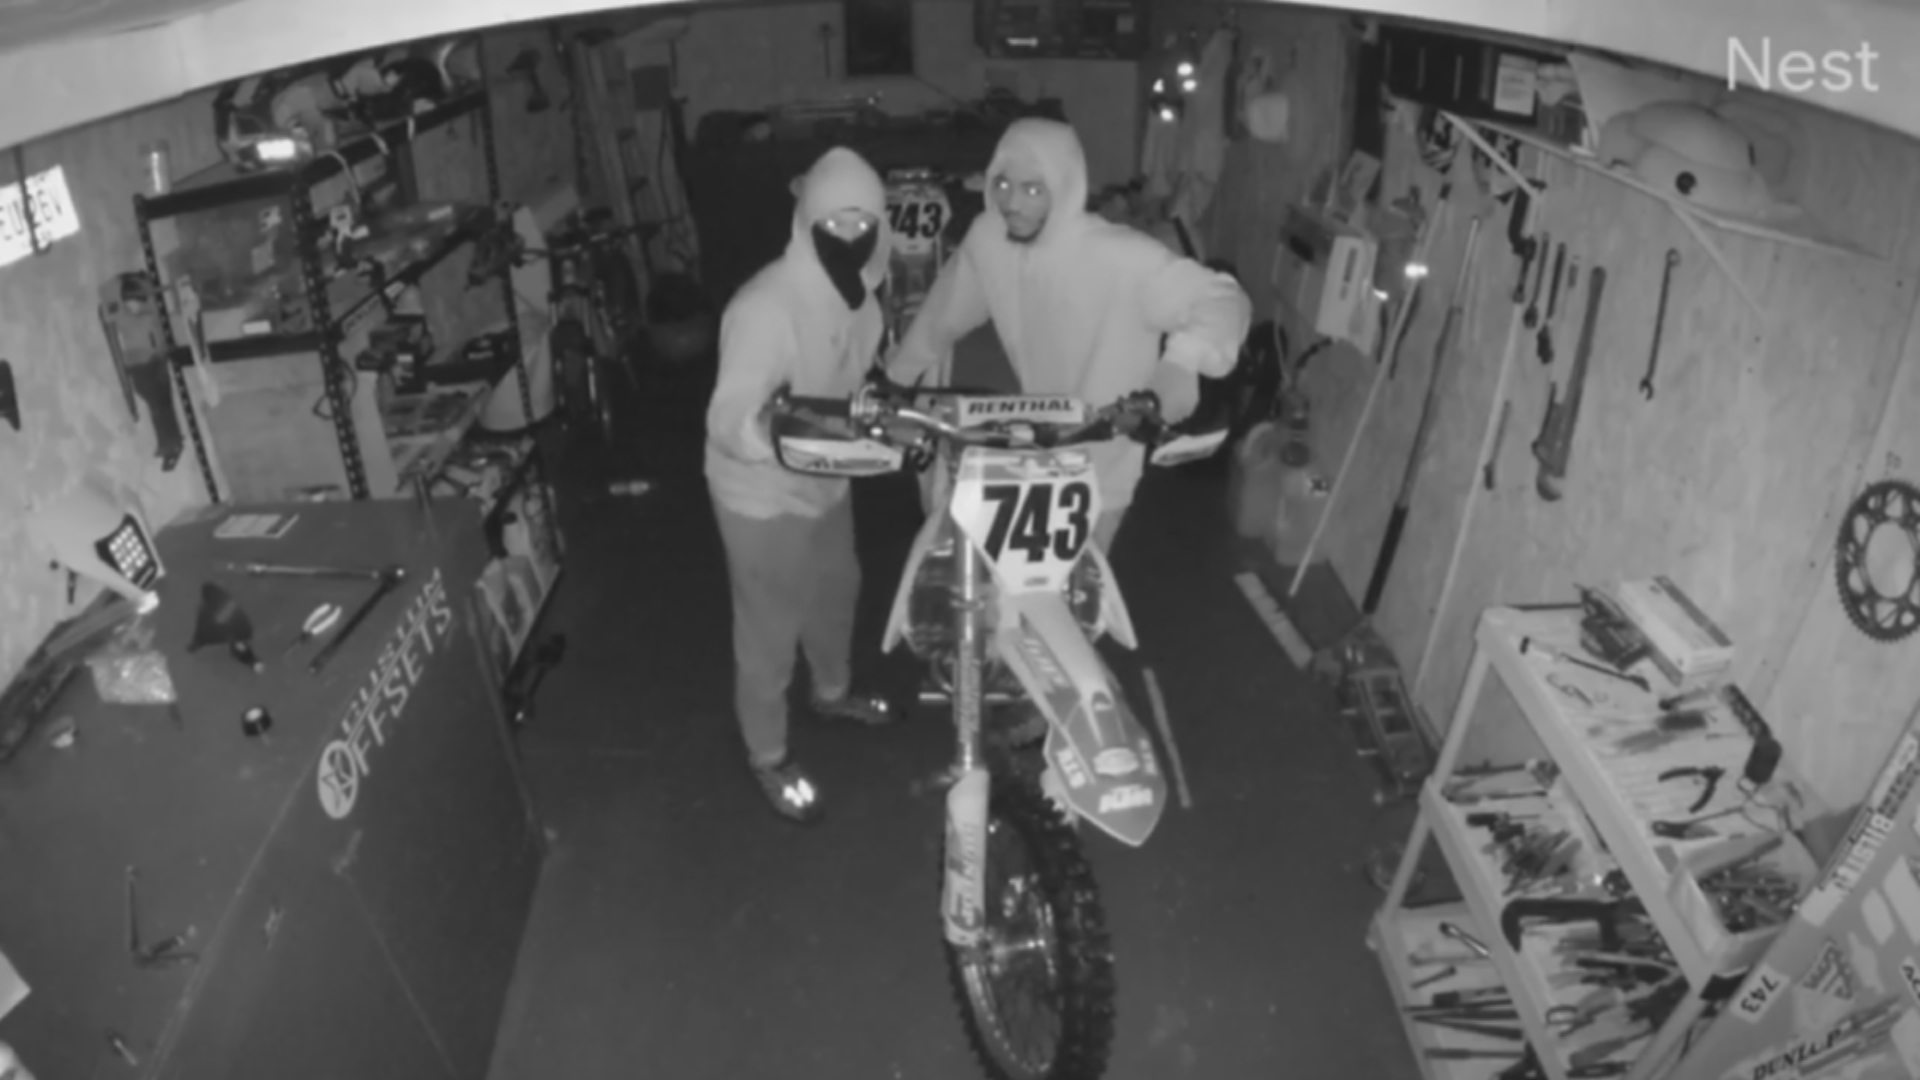 Police Asking For Public's Help To Identify Multiple Suspects That Allegedly Stole Dirt Bikes In South Jersey